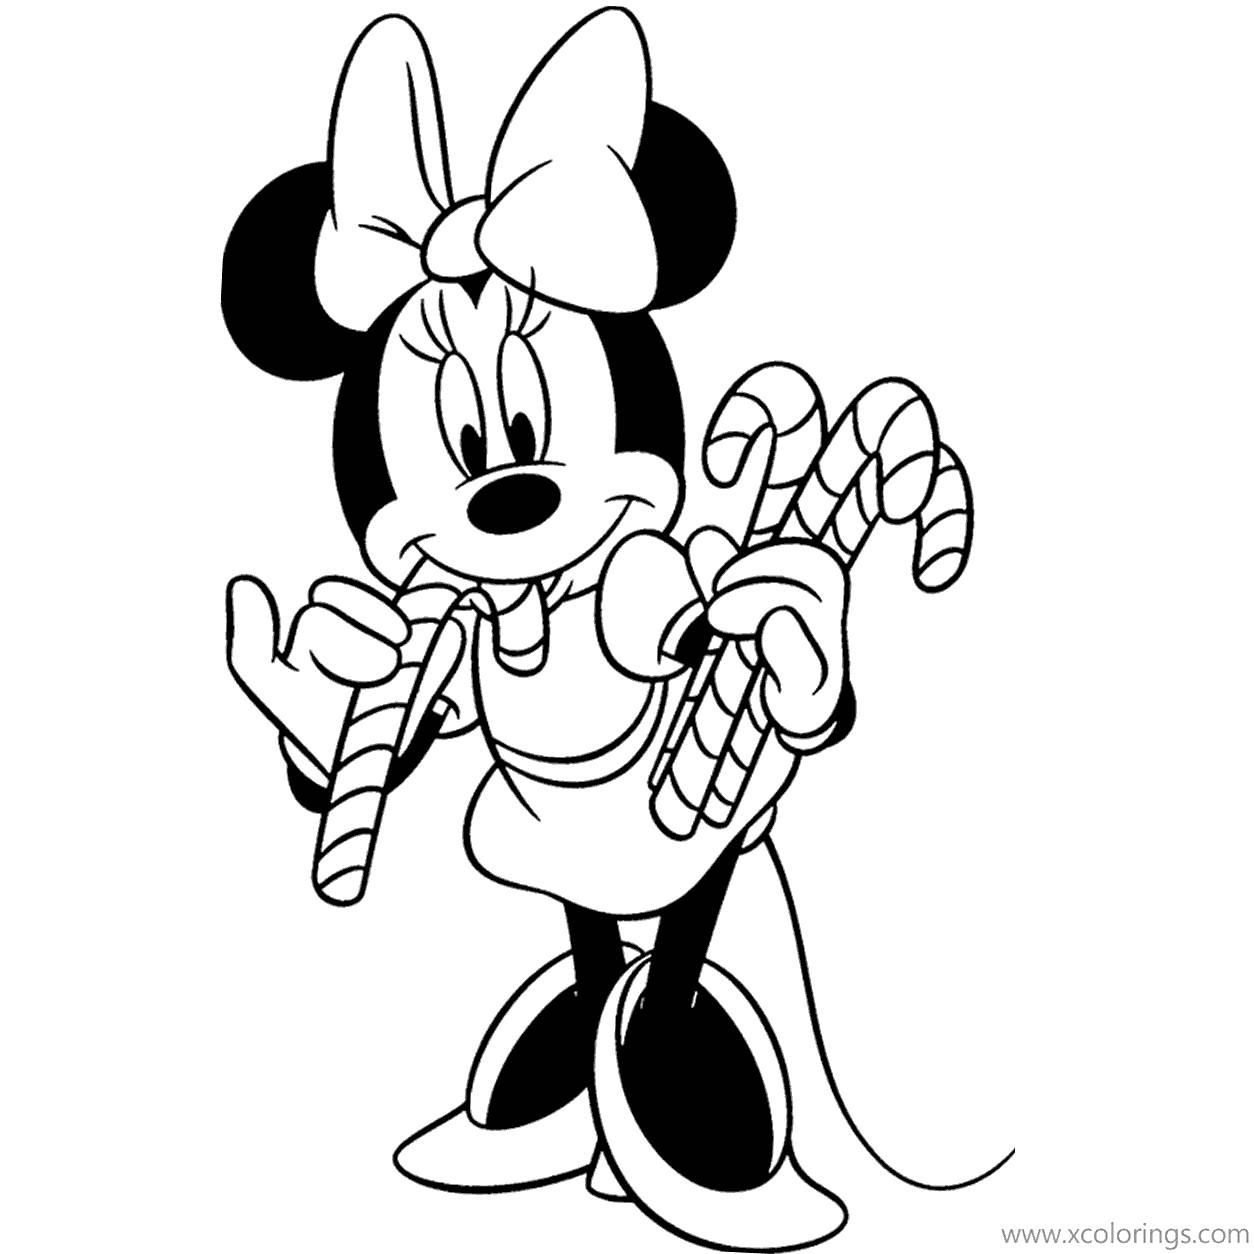 Free Minnie Mouse Christmas Candy Cane Coloring Pages printable